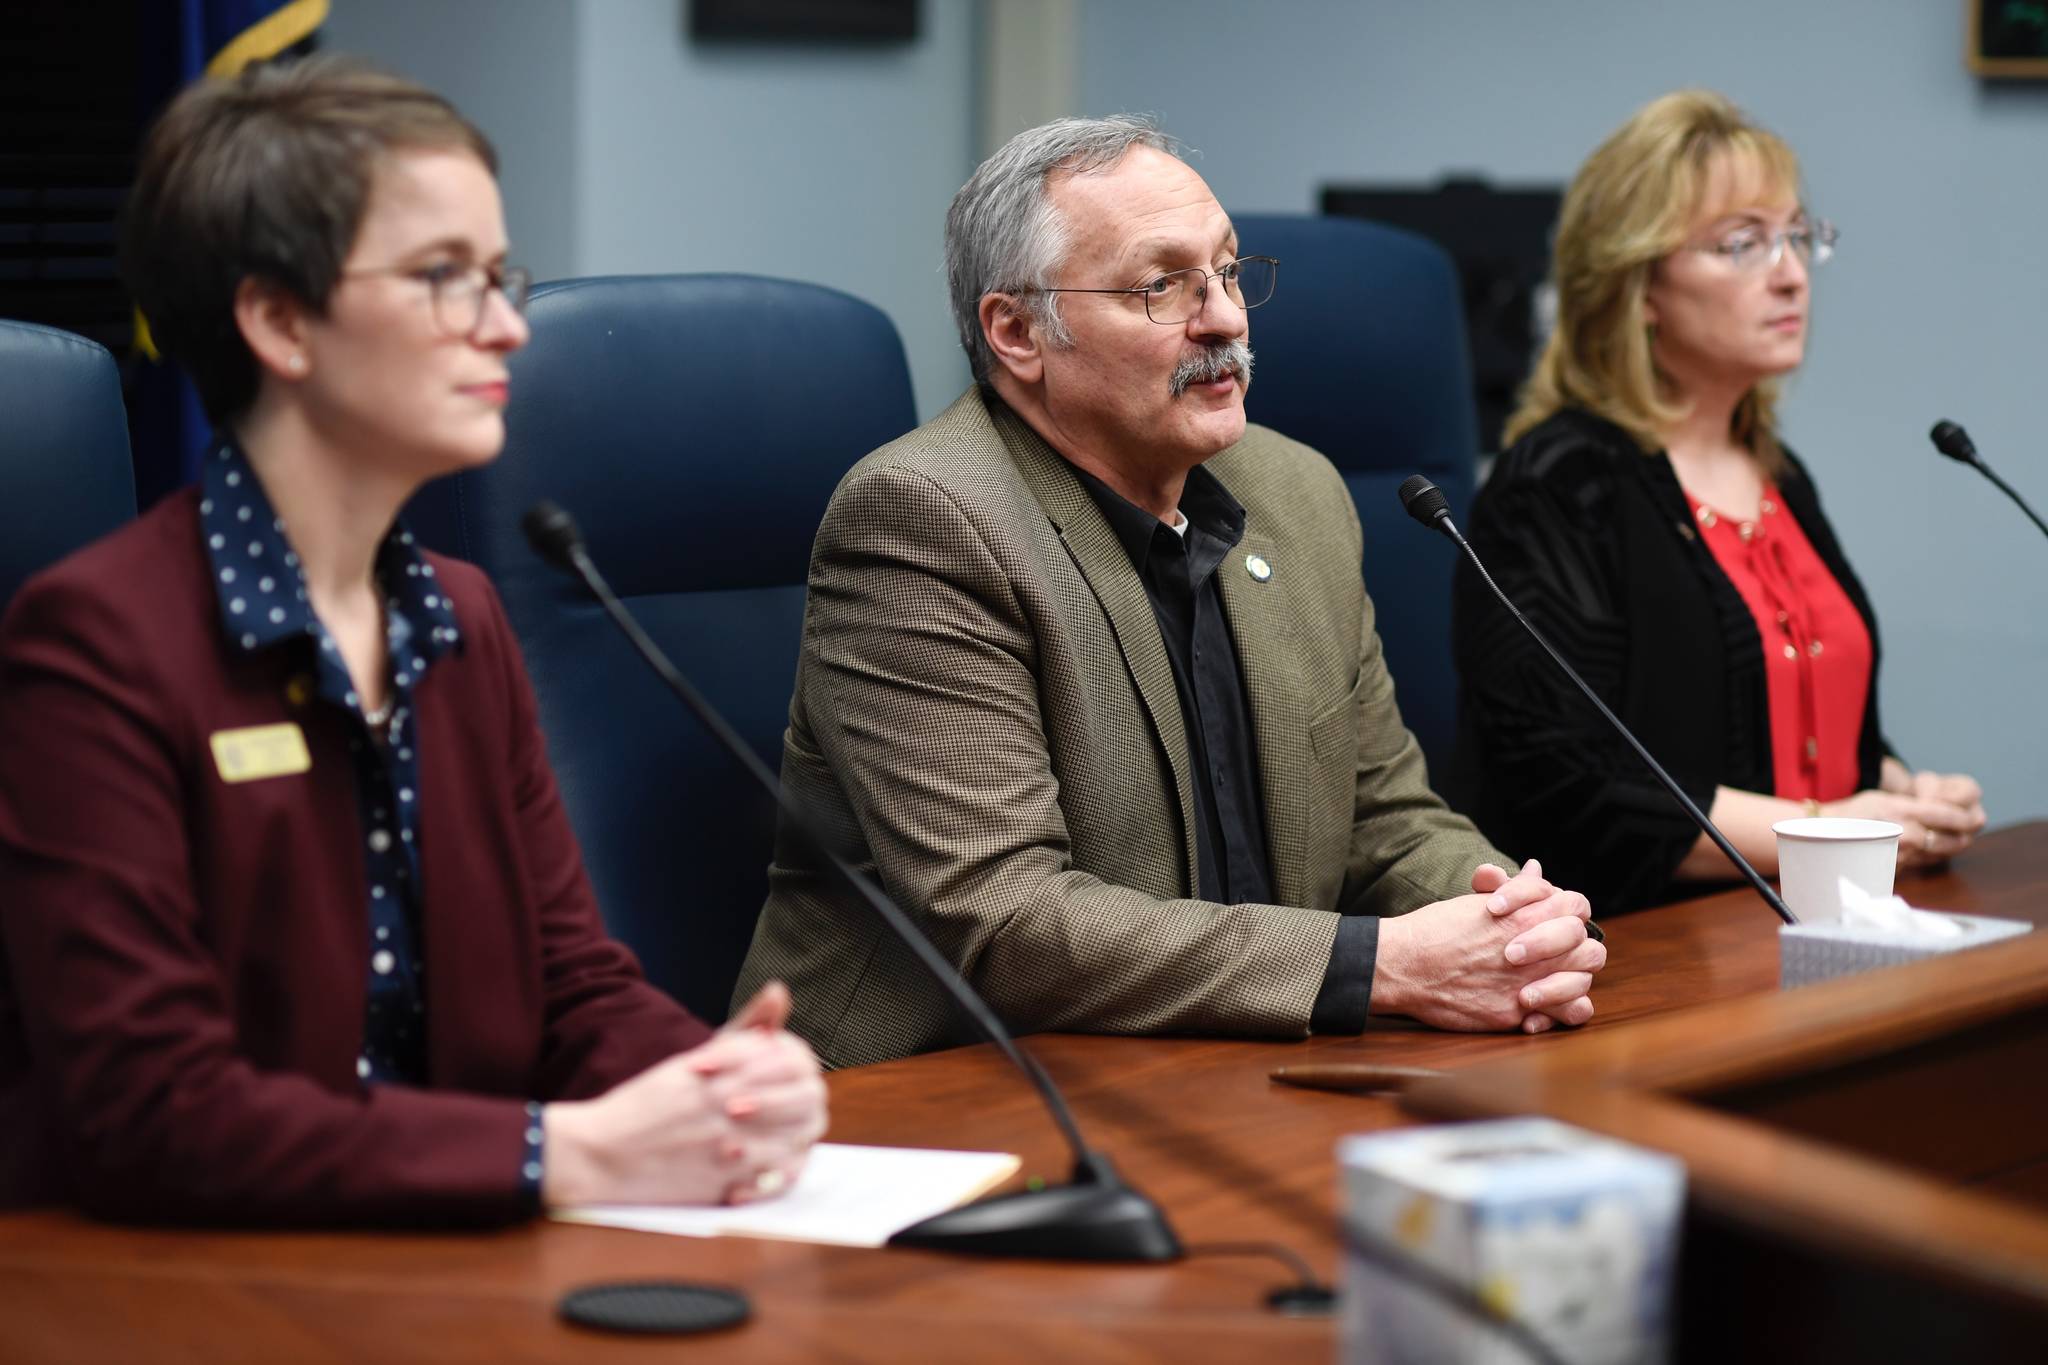 Rep. David Talerico, R-Healy, speaks during a press conference with Rep. Sarah Vance, R-Homer, left, and Rep. Colleen Sullivan-Leonard, R-Wasilla,at the Capitol on Tuesday, Jan. 29, 2019. (Michael Penn | Juneau Empire)